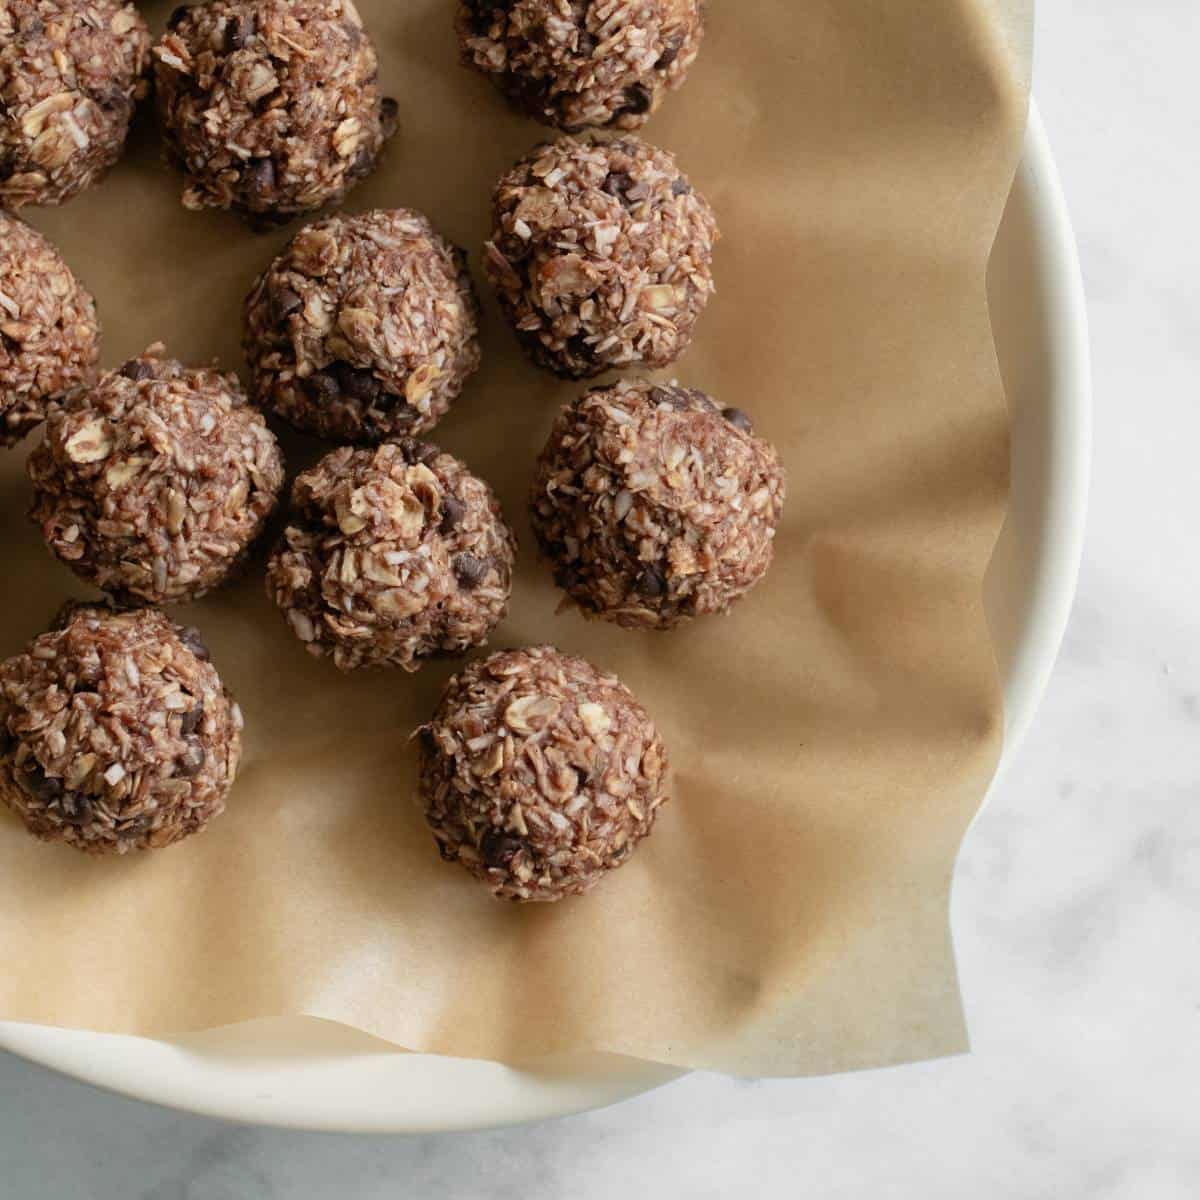 Chilled energy balls served on a parchment paper lined plate.